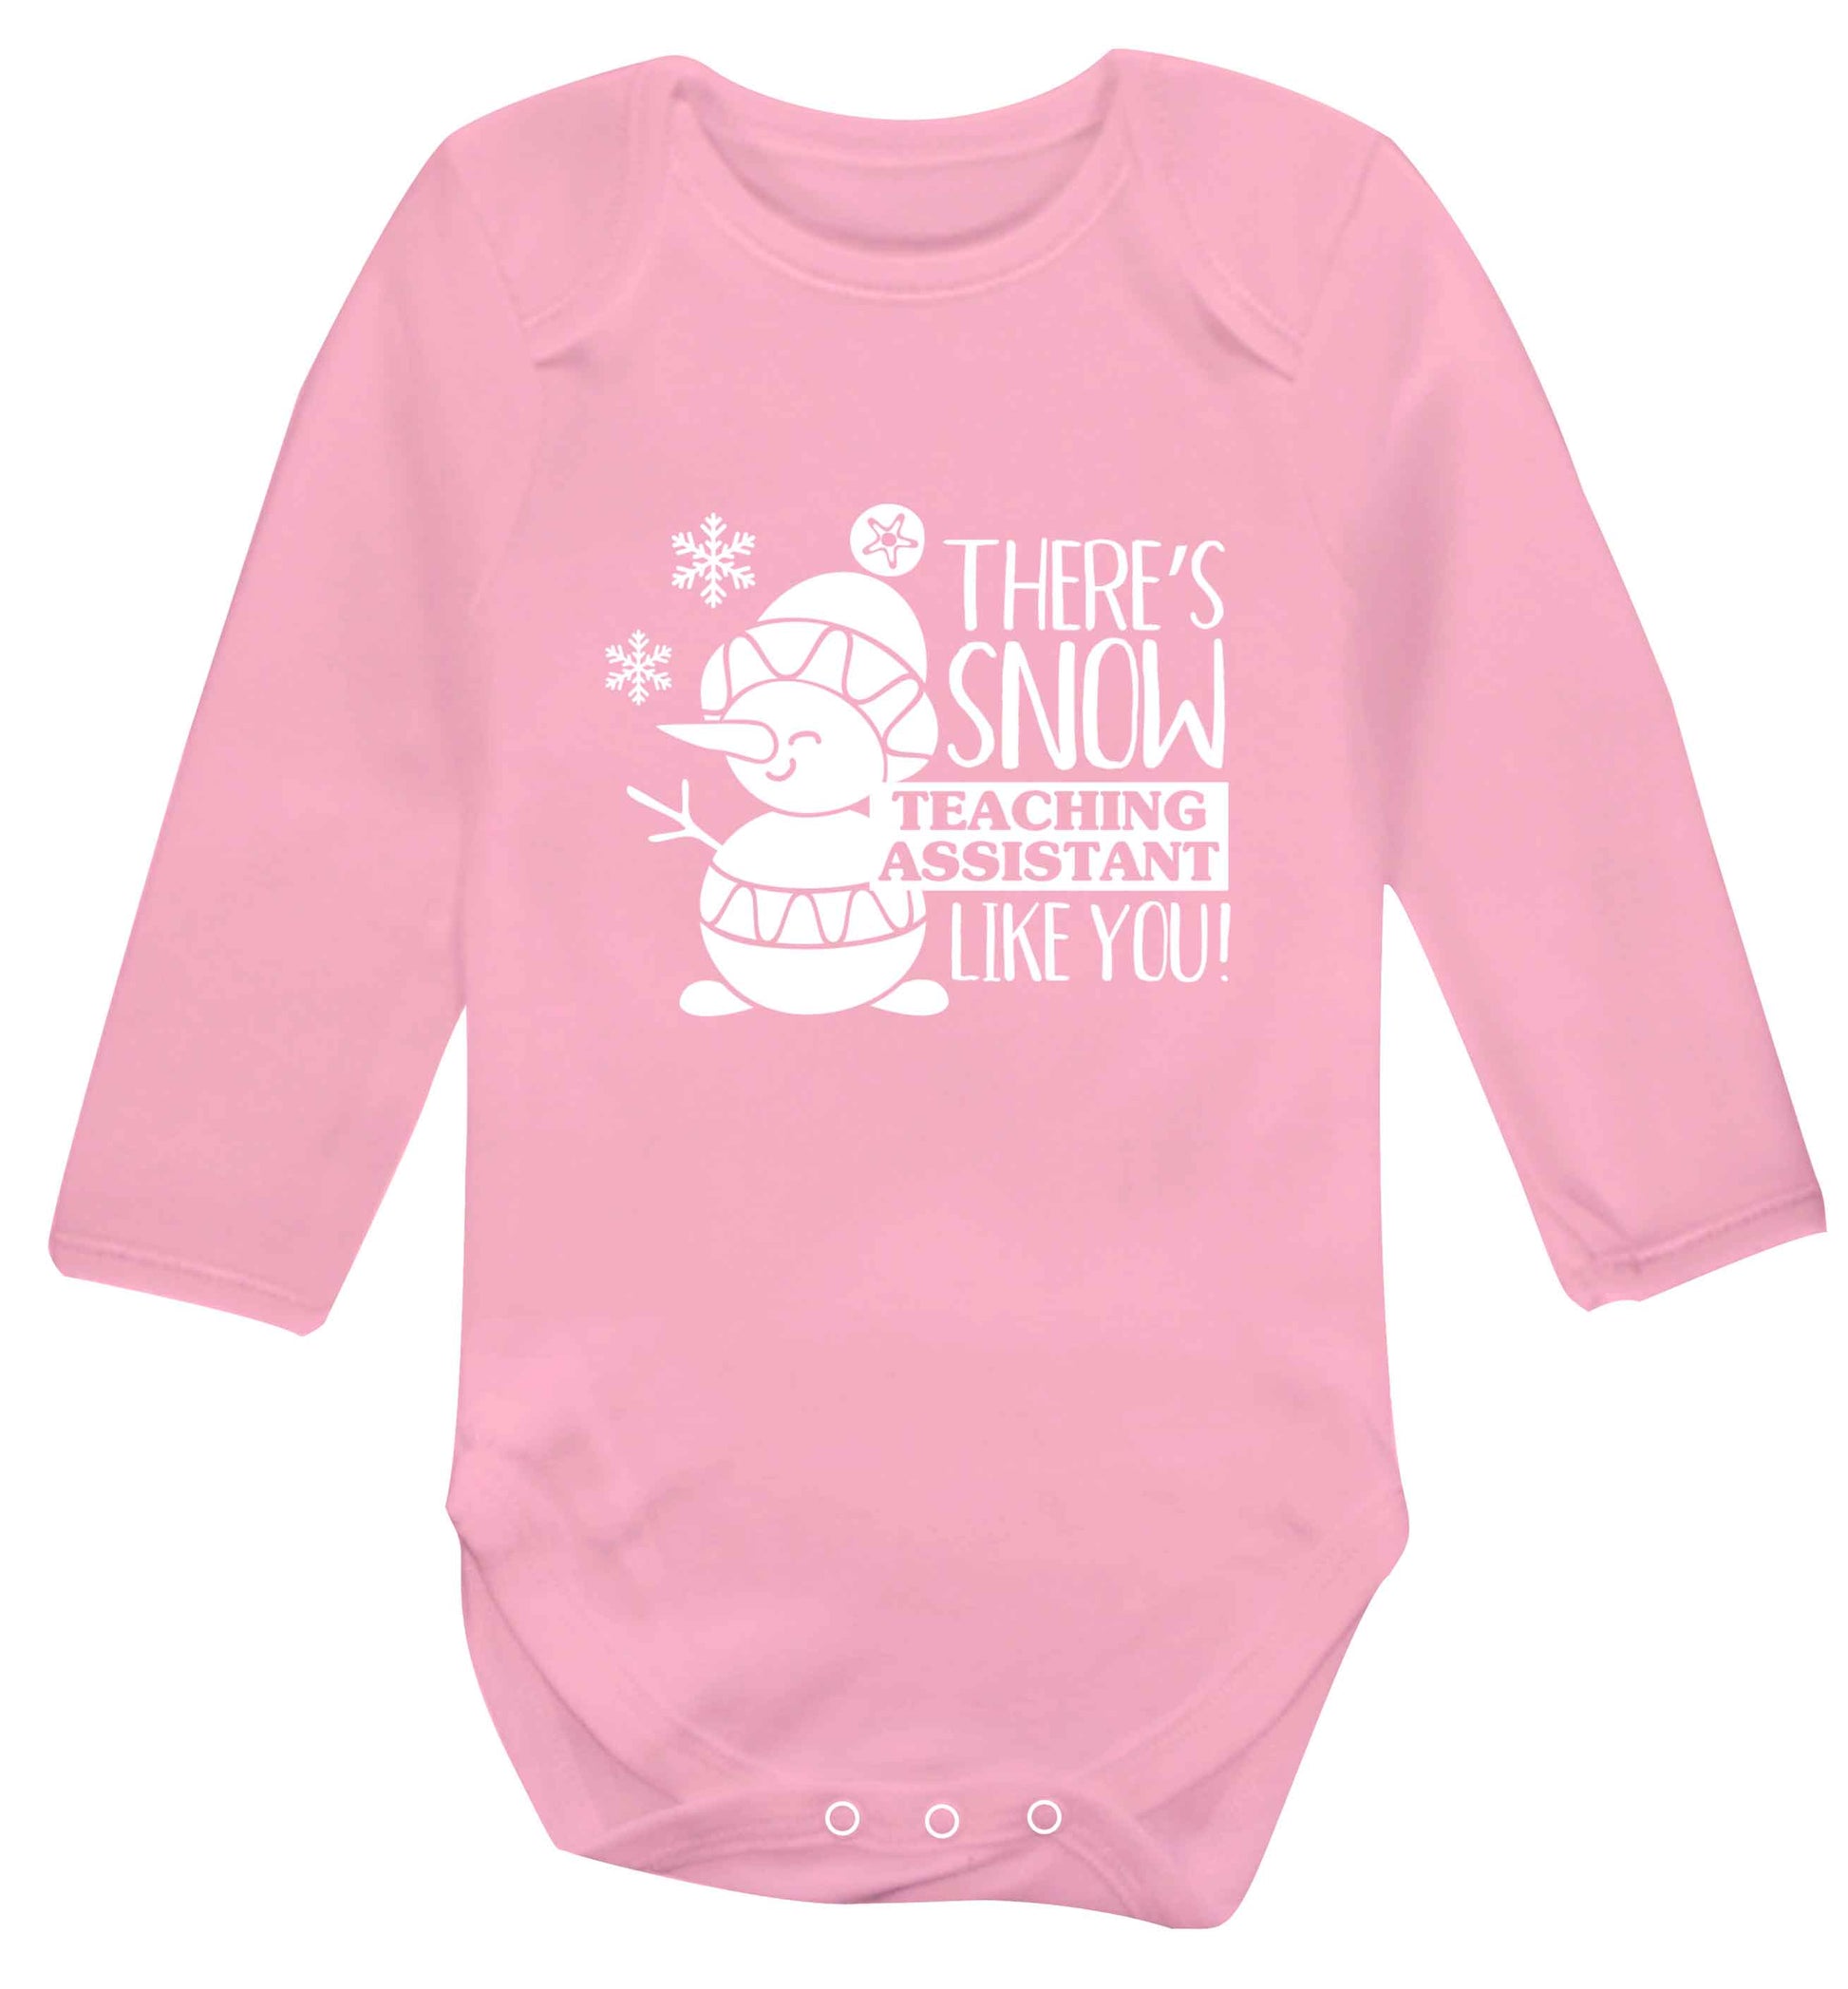 There's snow teaching assistant like you baby vest long sleeved pale pink 6-12 months